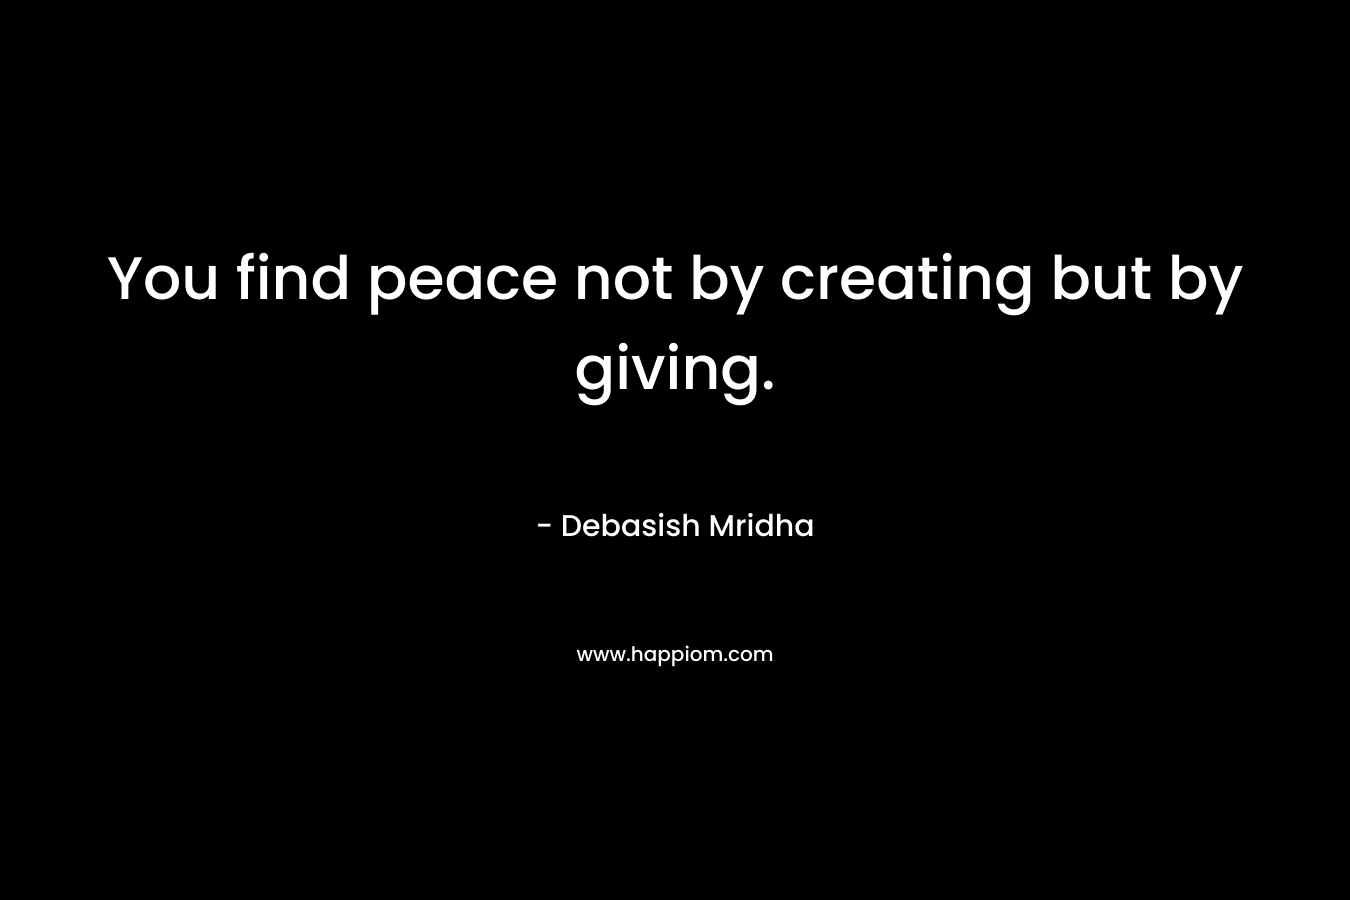 You find peace not by creating but by giving.